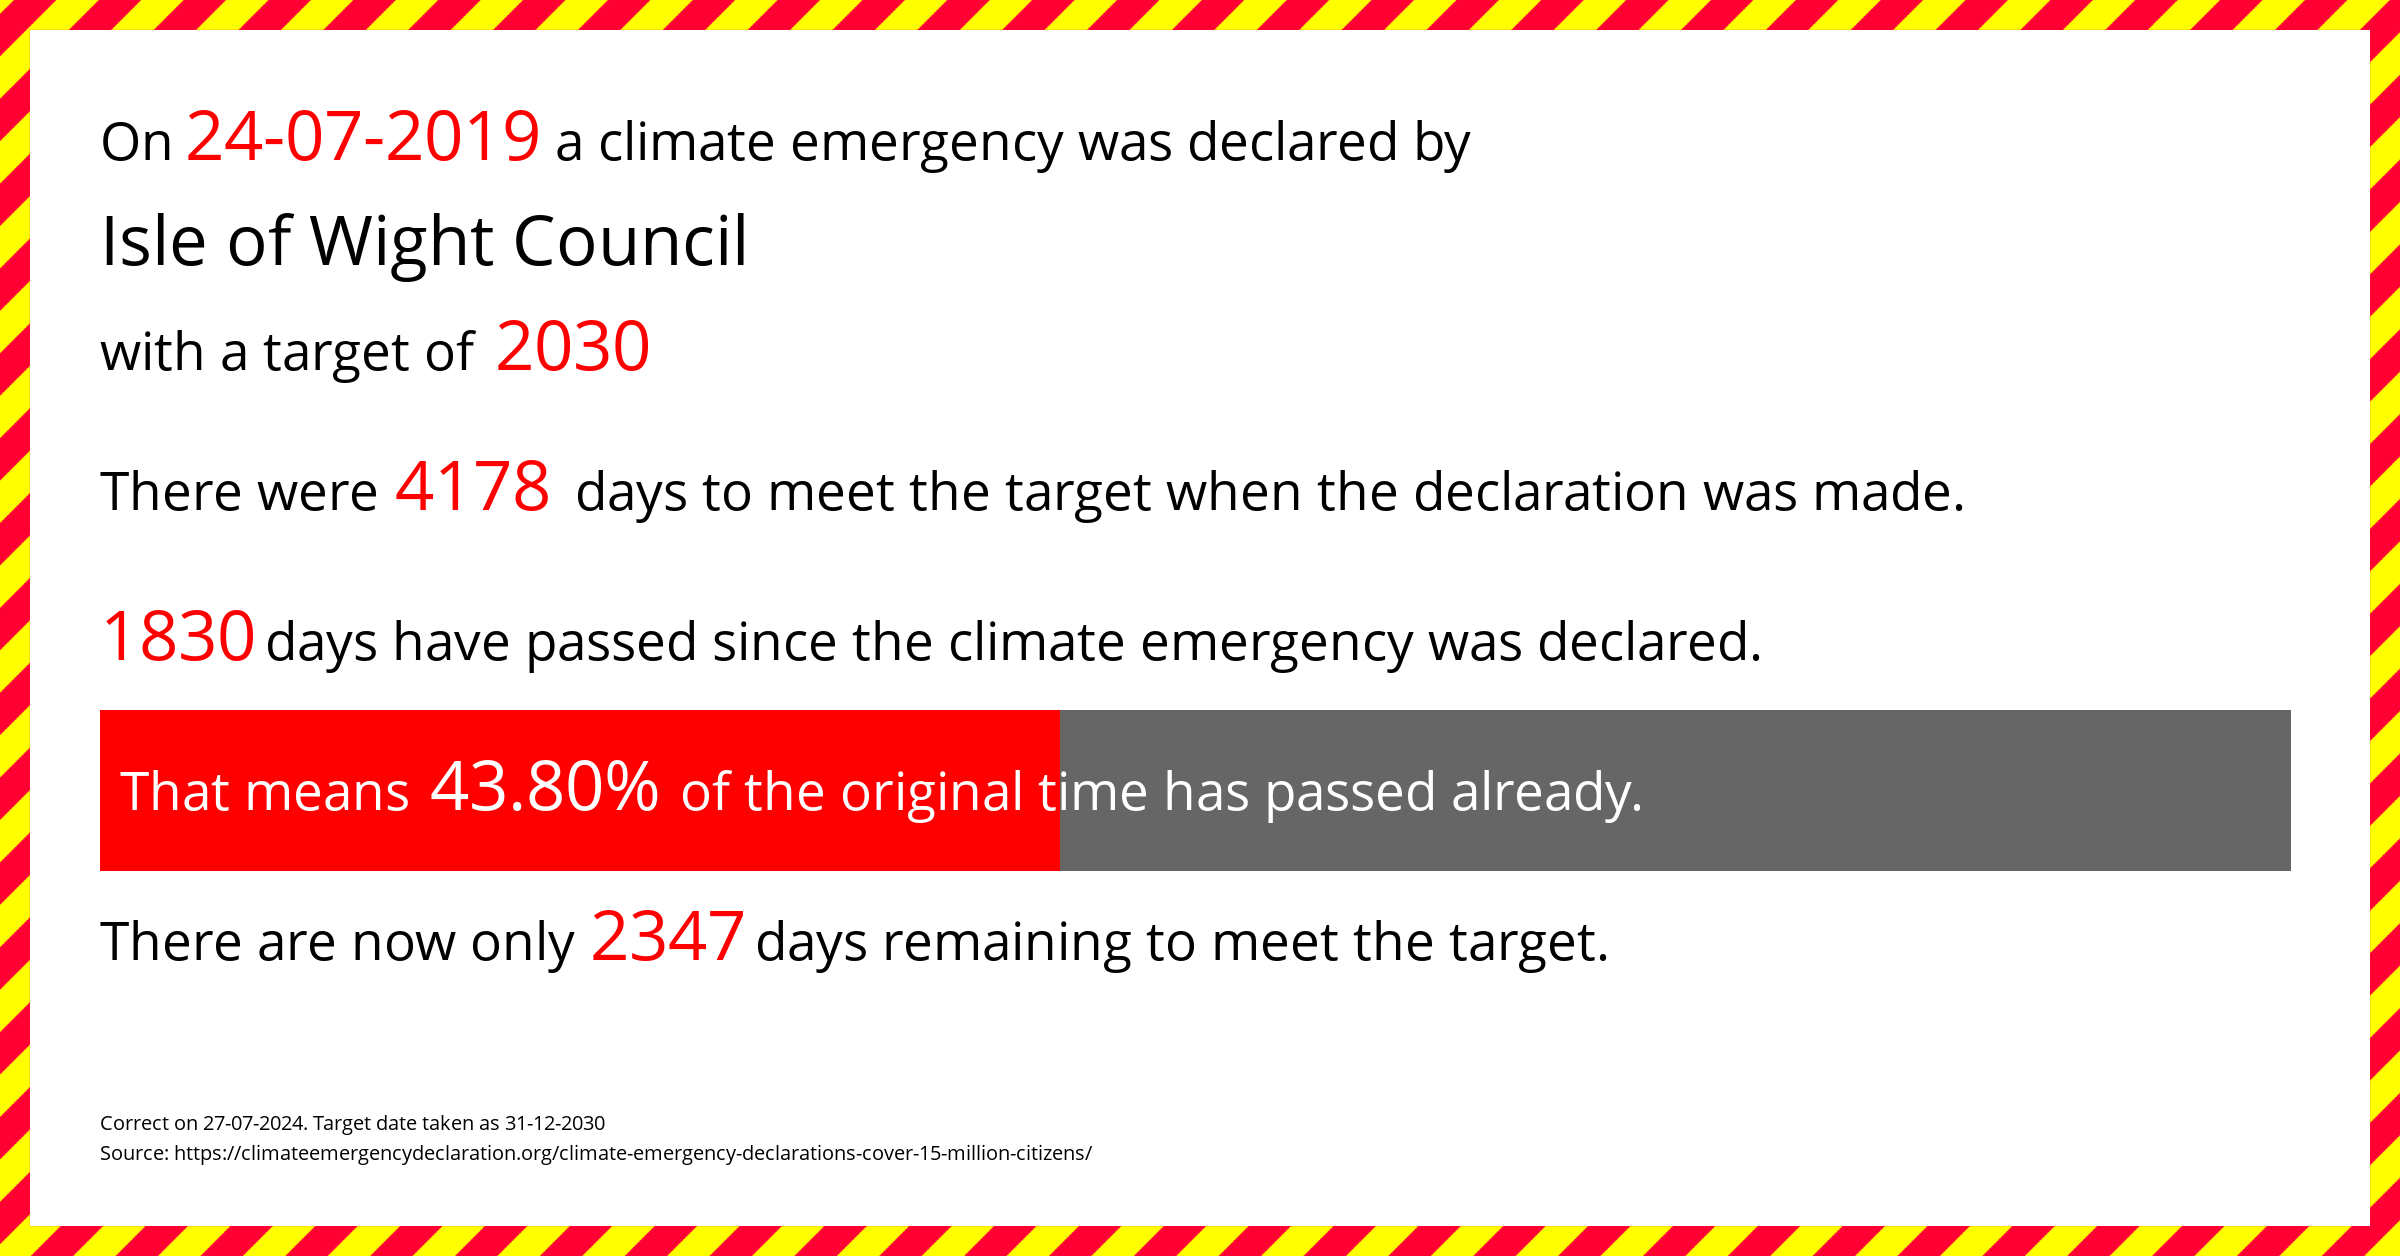 Isle of Wight Council declared a Climate emergency on Wednesday 24th July 2019, with a target of 2030.